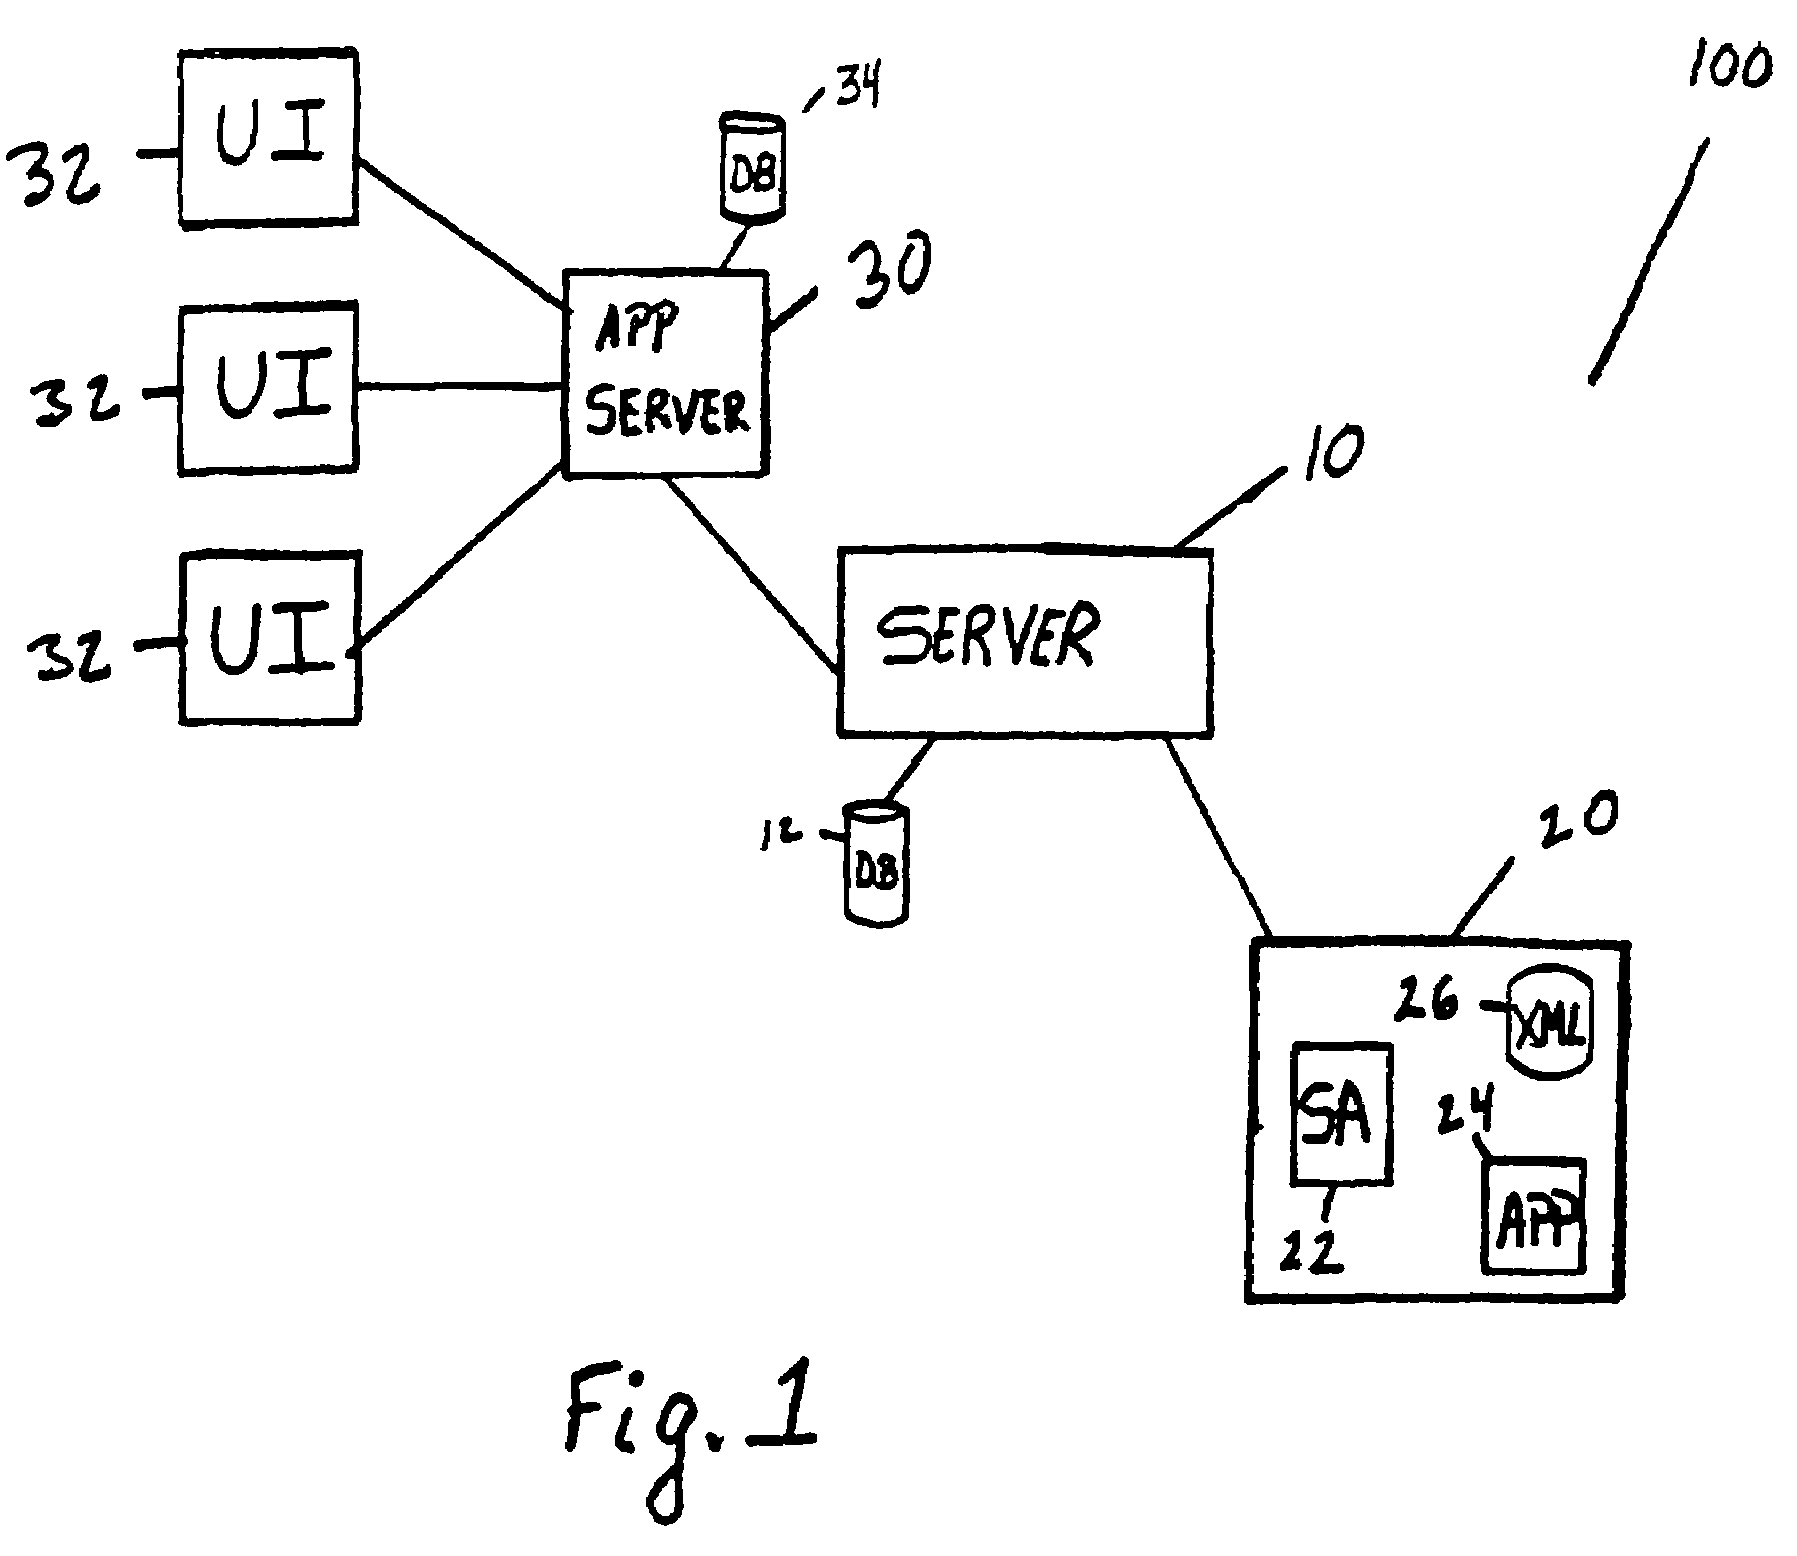 Remote application publication and communication system